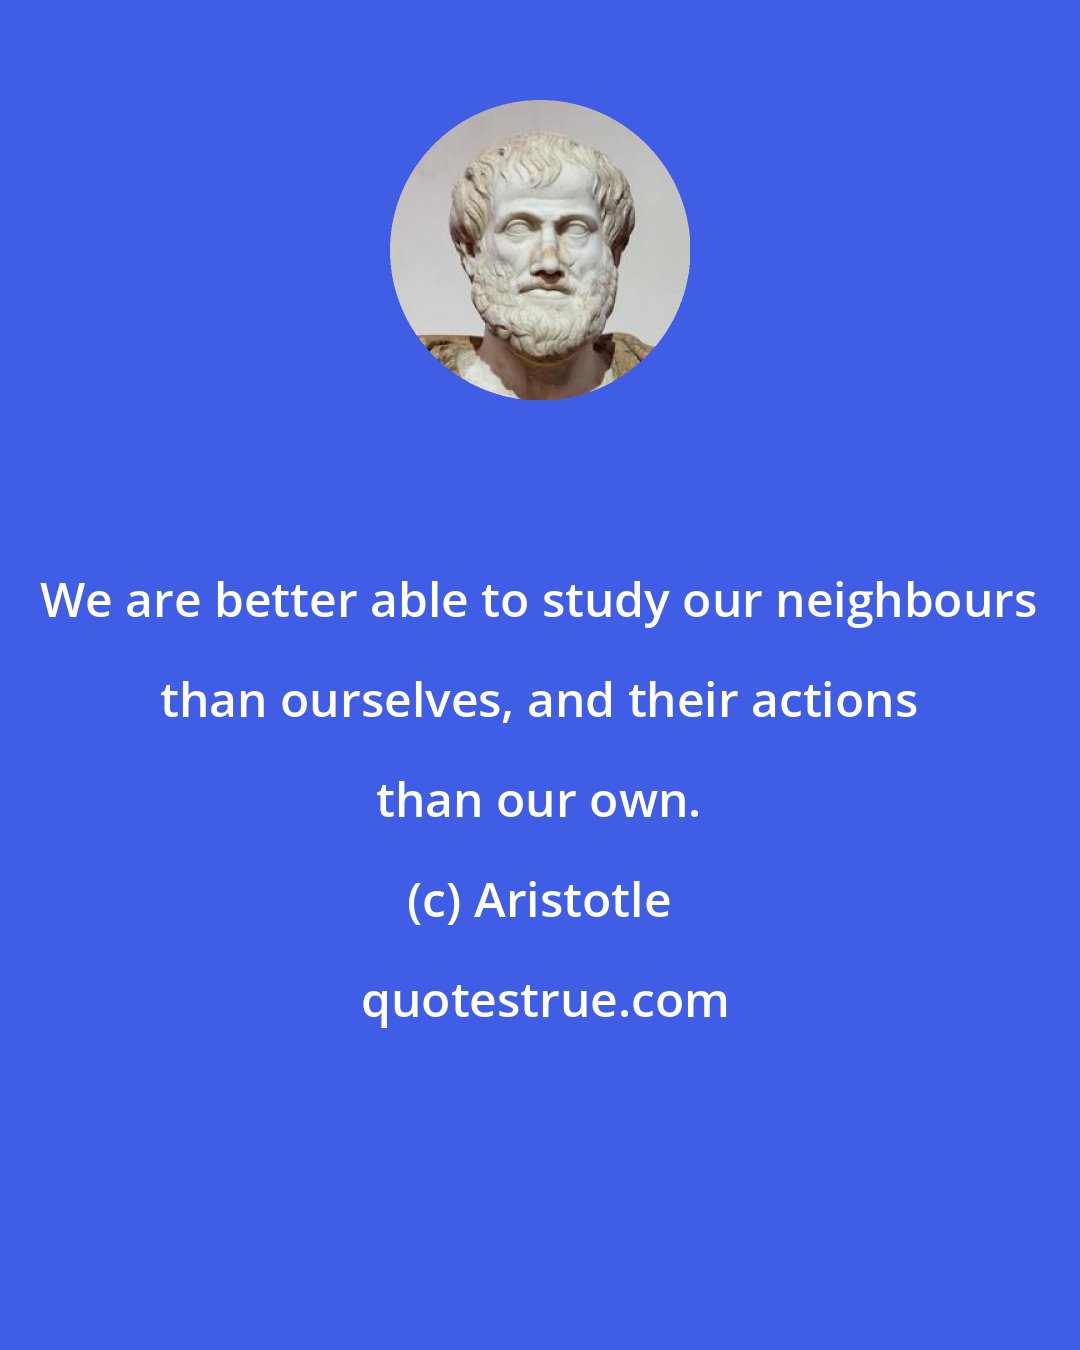 Aristotle: We are better able to study our neighbours than ourselves, and their actions than our own.